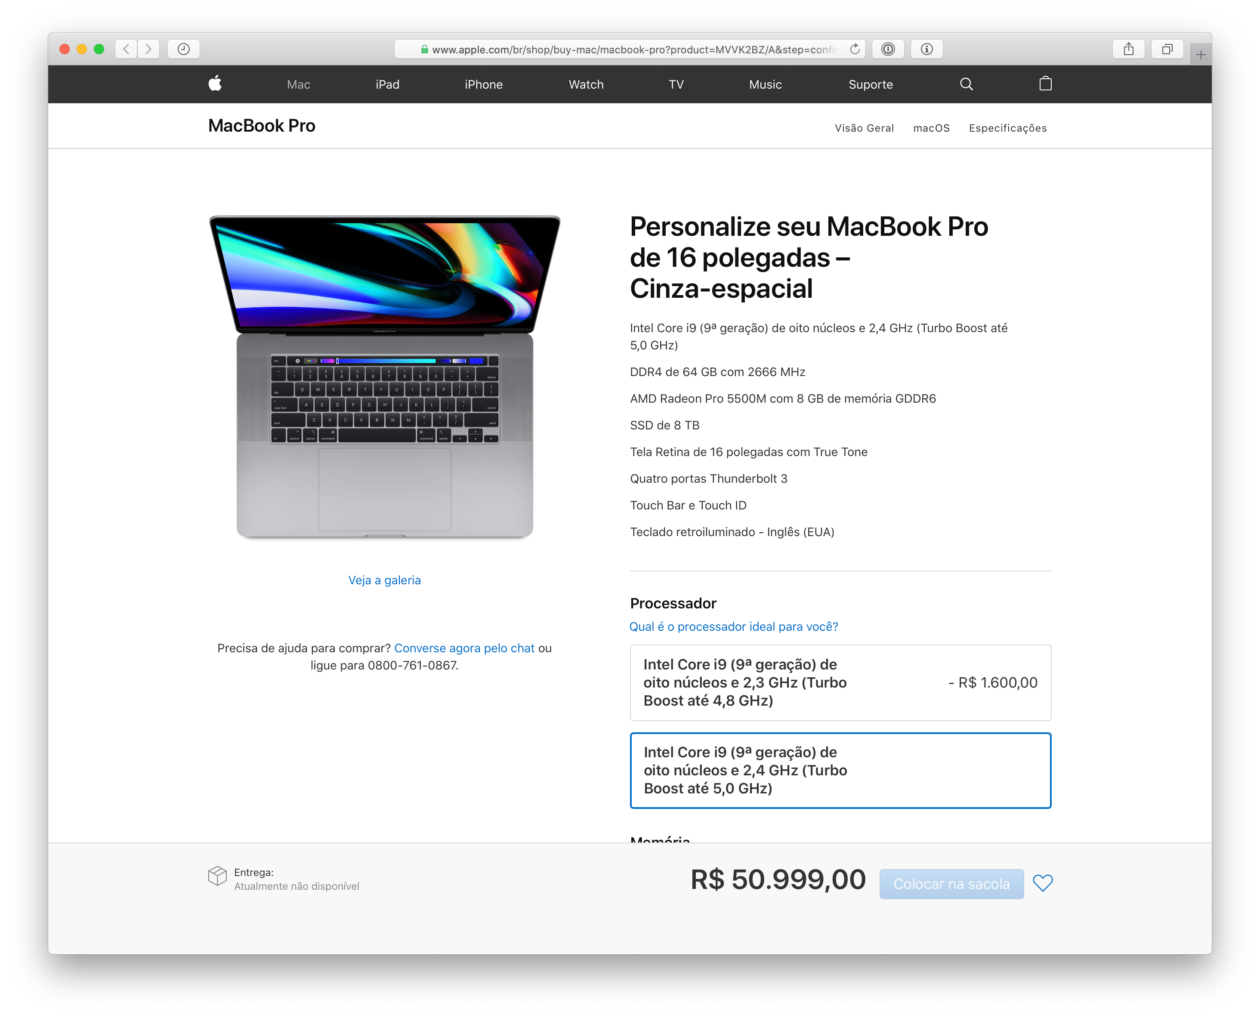 New 16 ″ MacBook Pro configured on the stem will cost $ 50,999 (or $ 6,099)